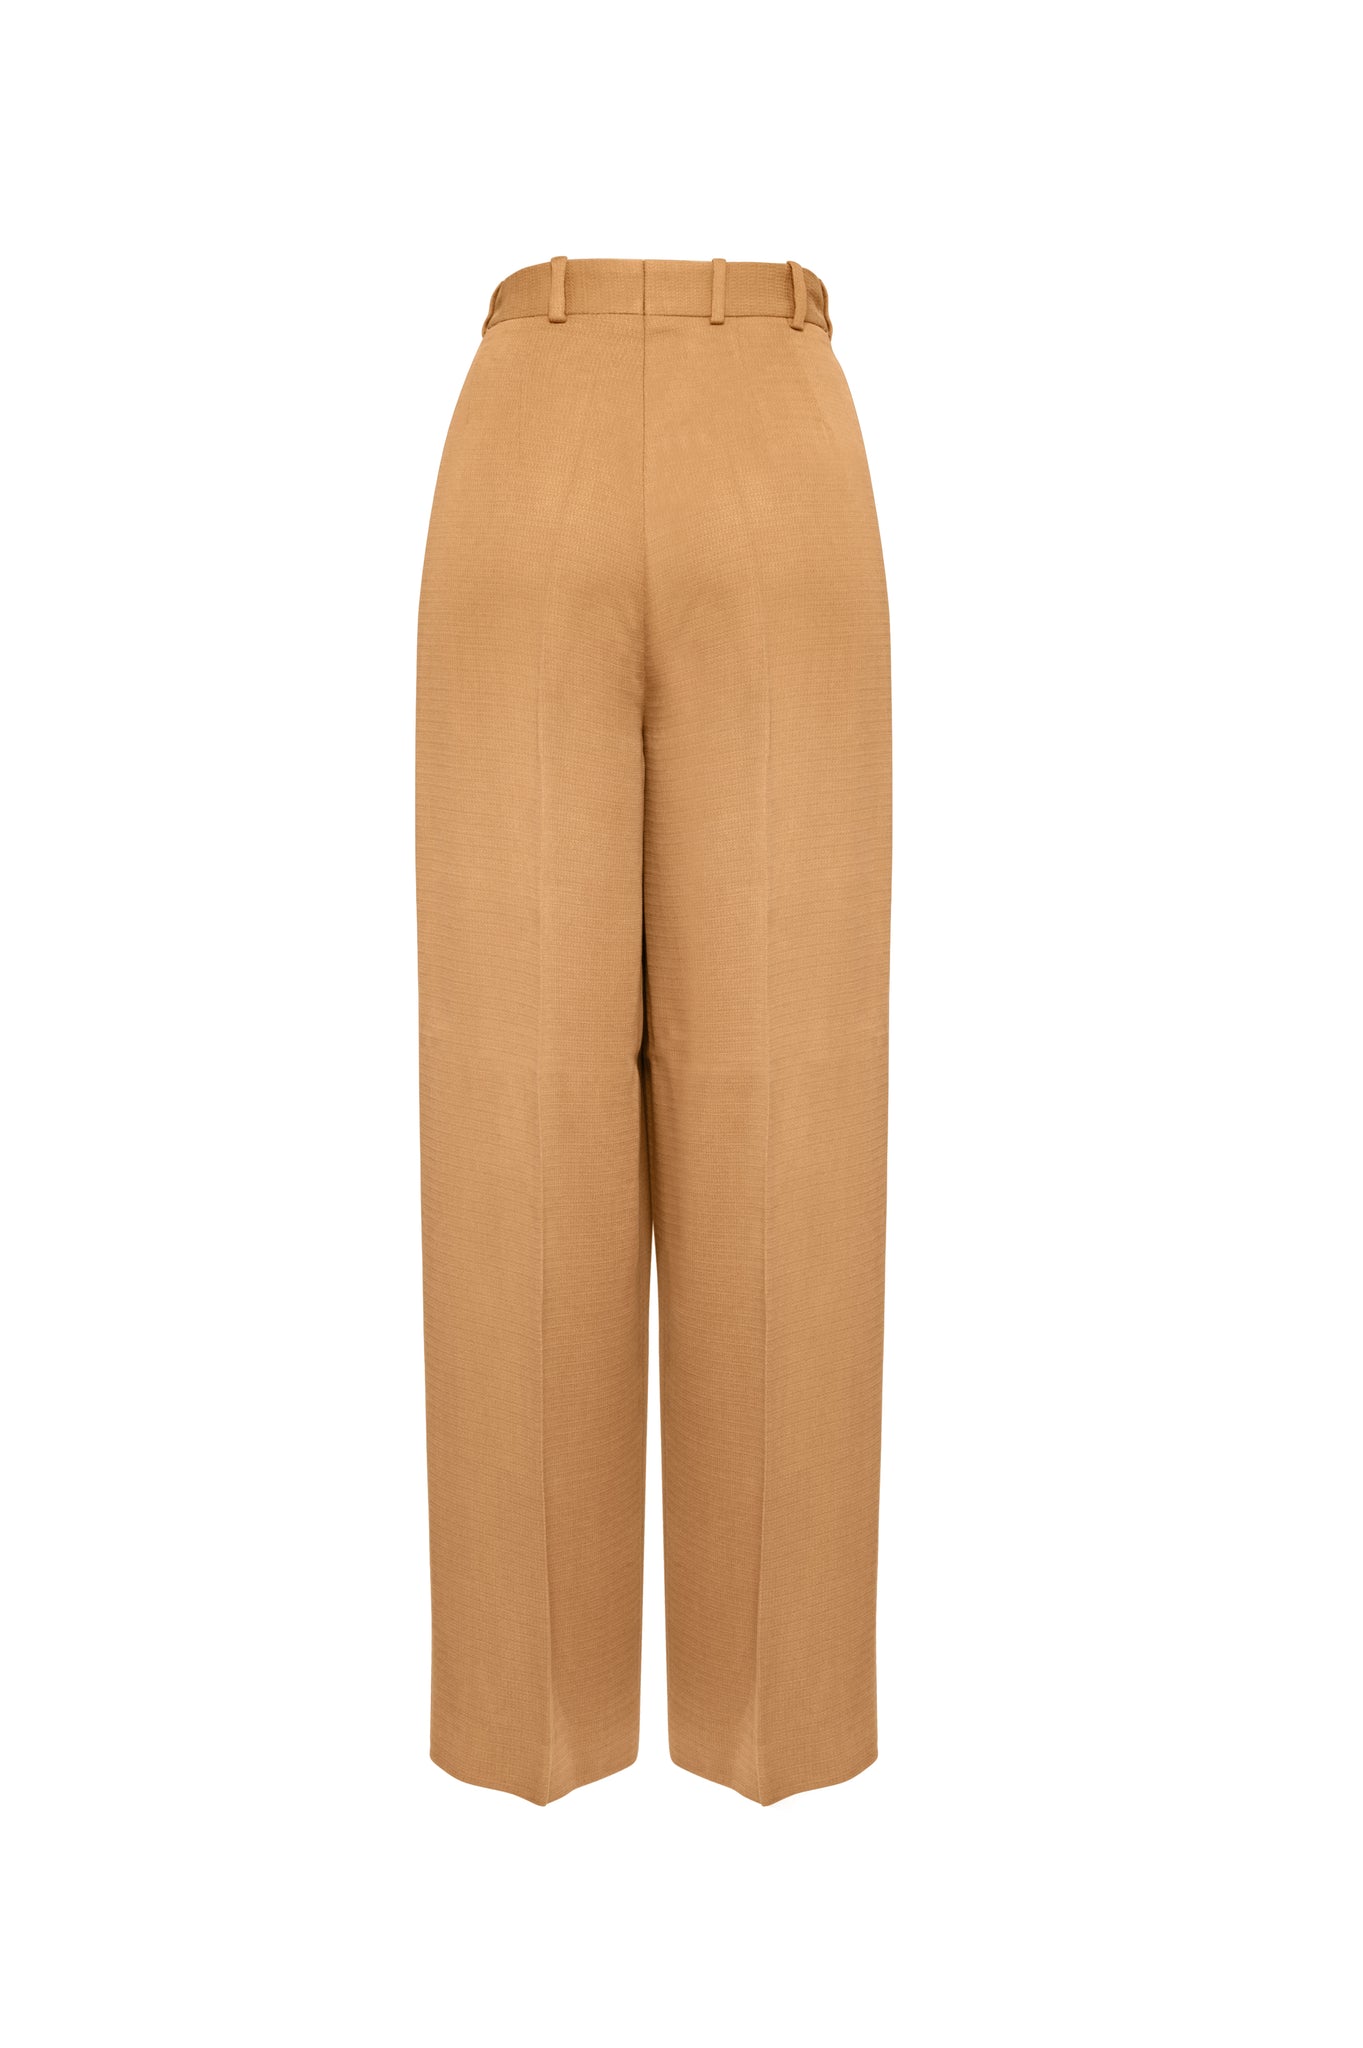 01/2 Structured High Waisted Pants Mustard backside - hello'ben store